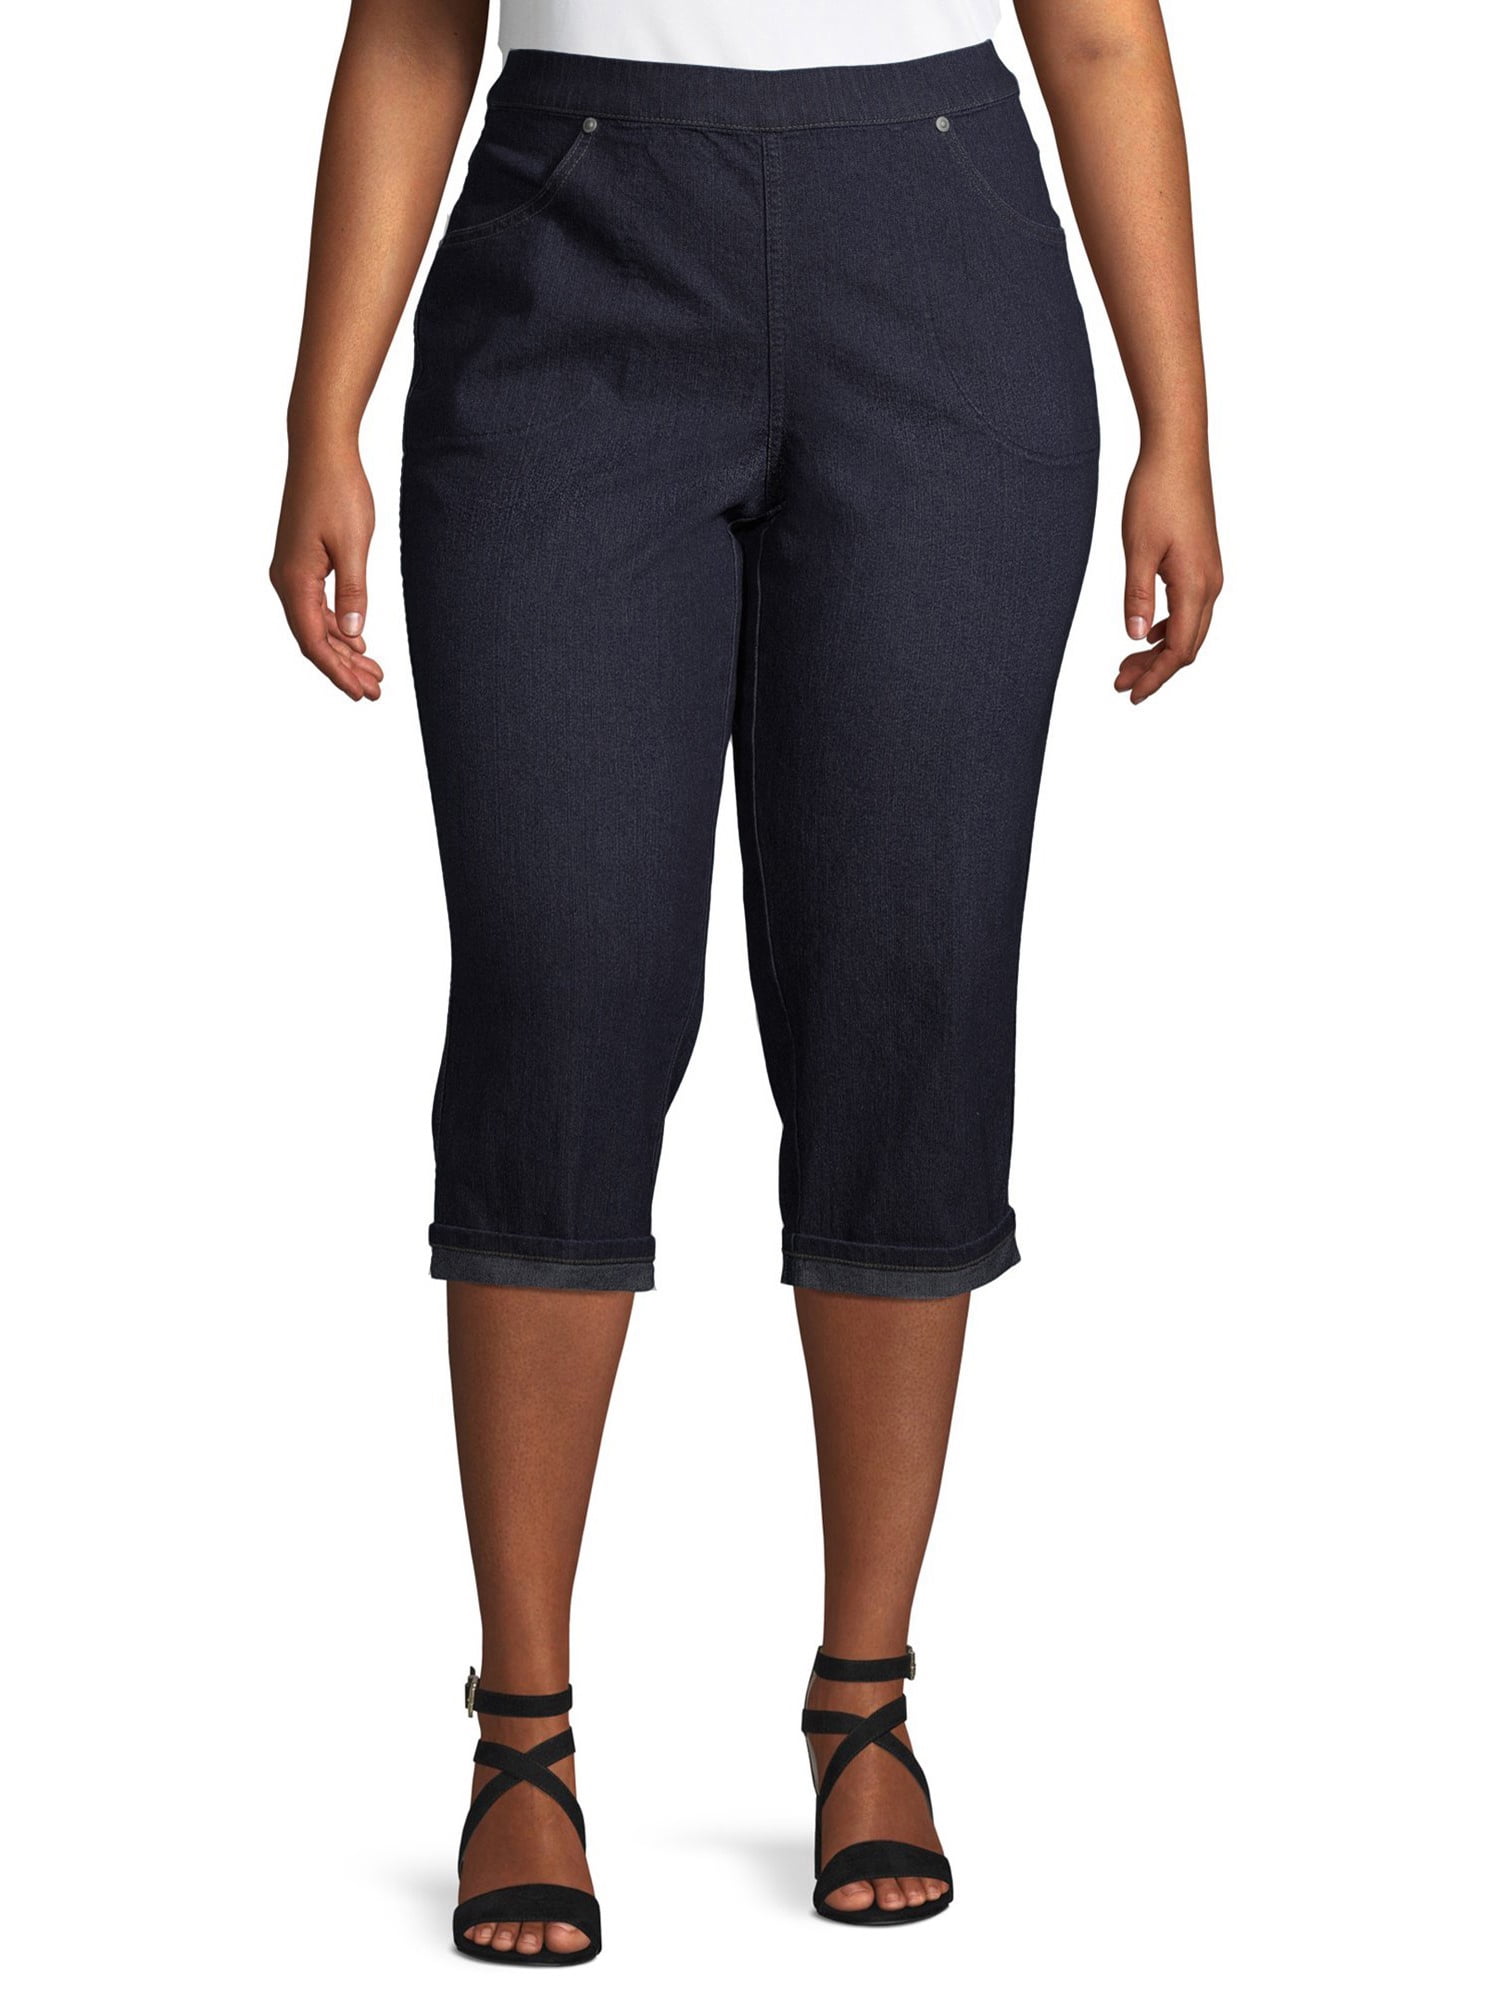 Just My Size Women's Plus Size 4 Pocket Pull on Rolled Cuff Denim ...